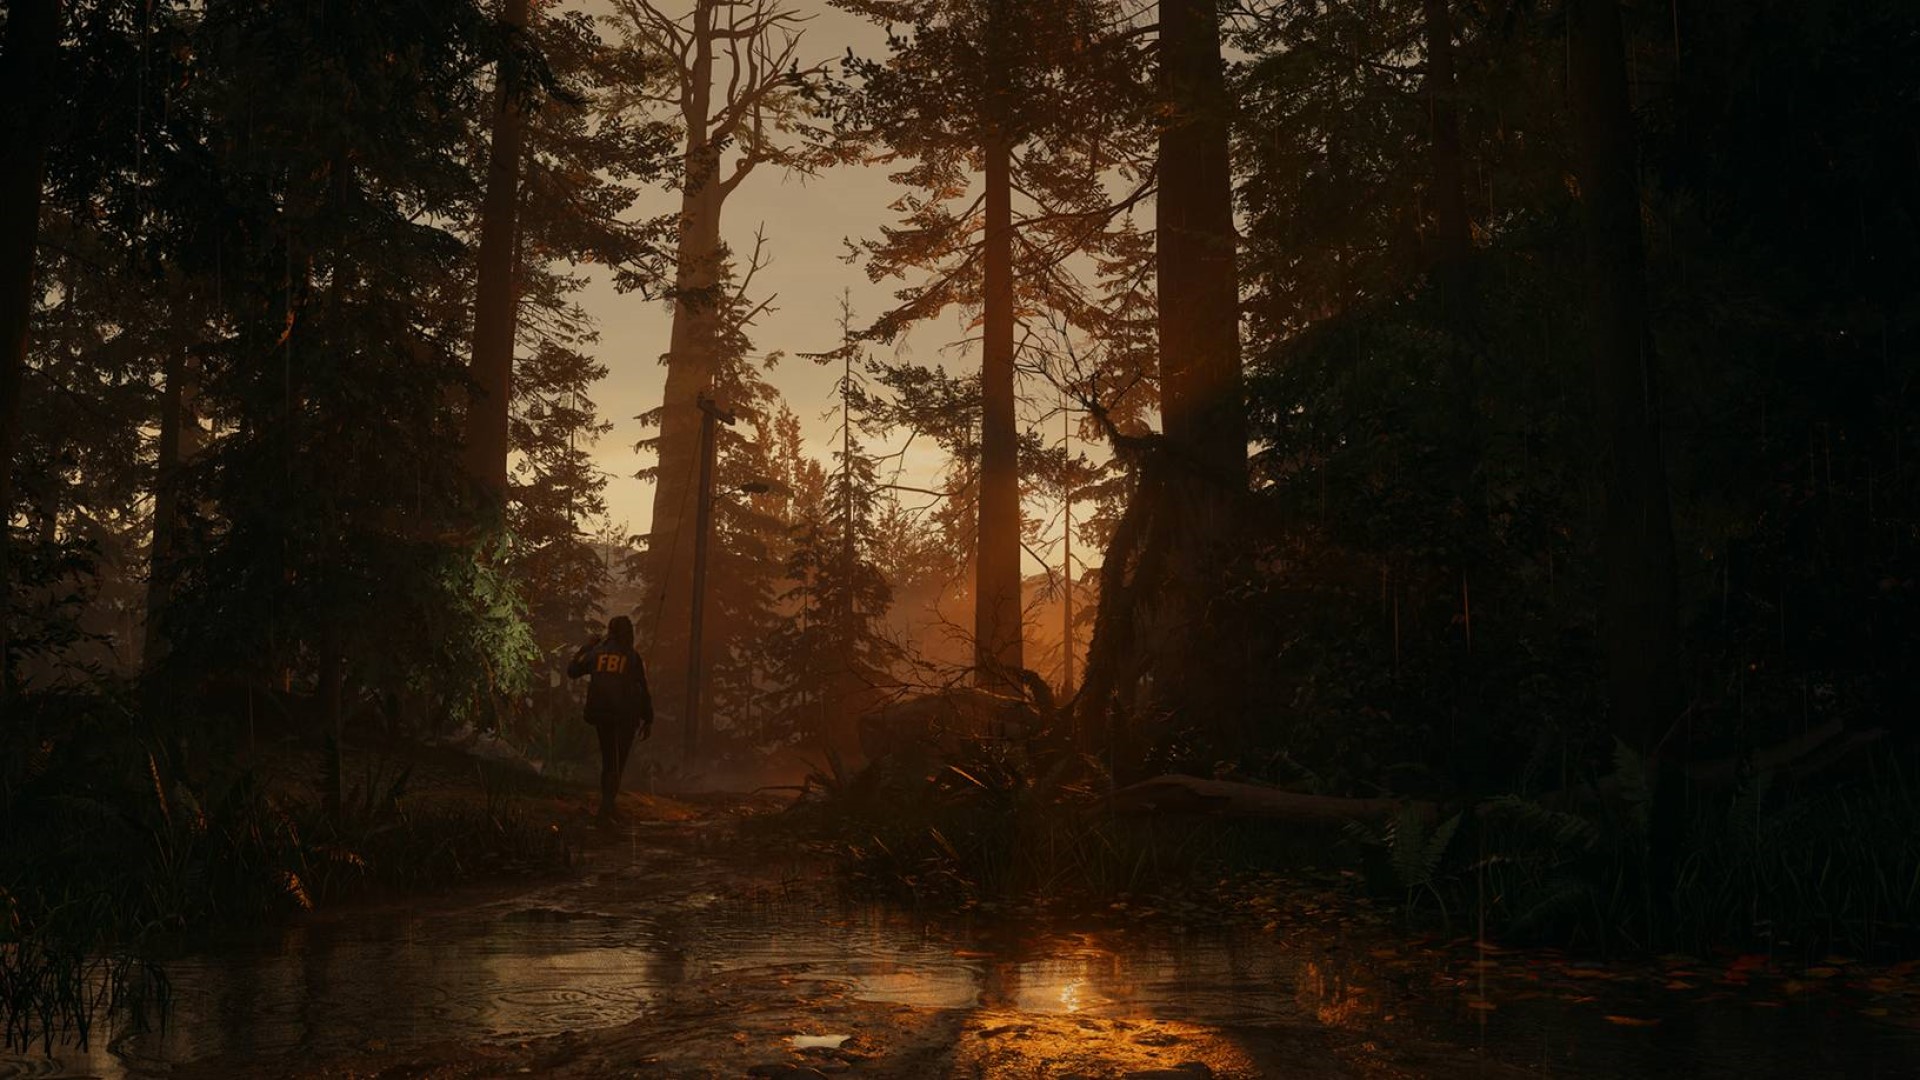 Alan Wake 2 Had Many Concepts, Current Game is the “Most Interesting and Ambitious” – Sam Lake